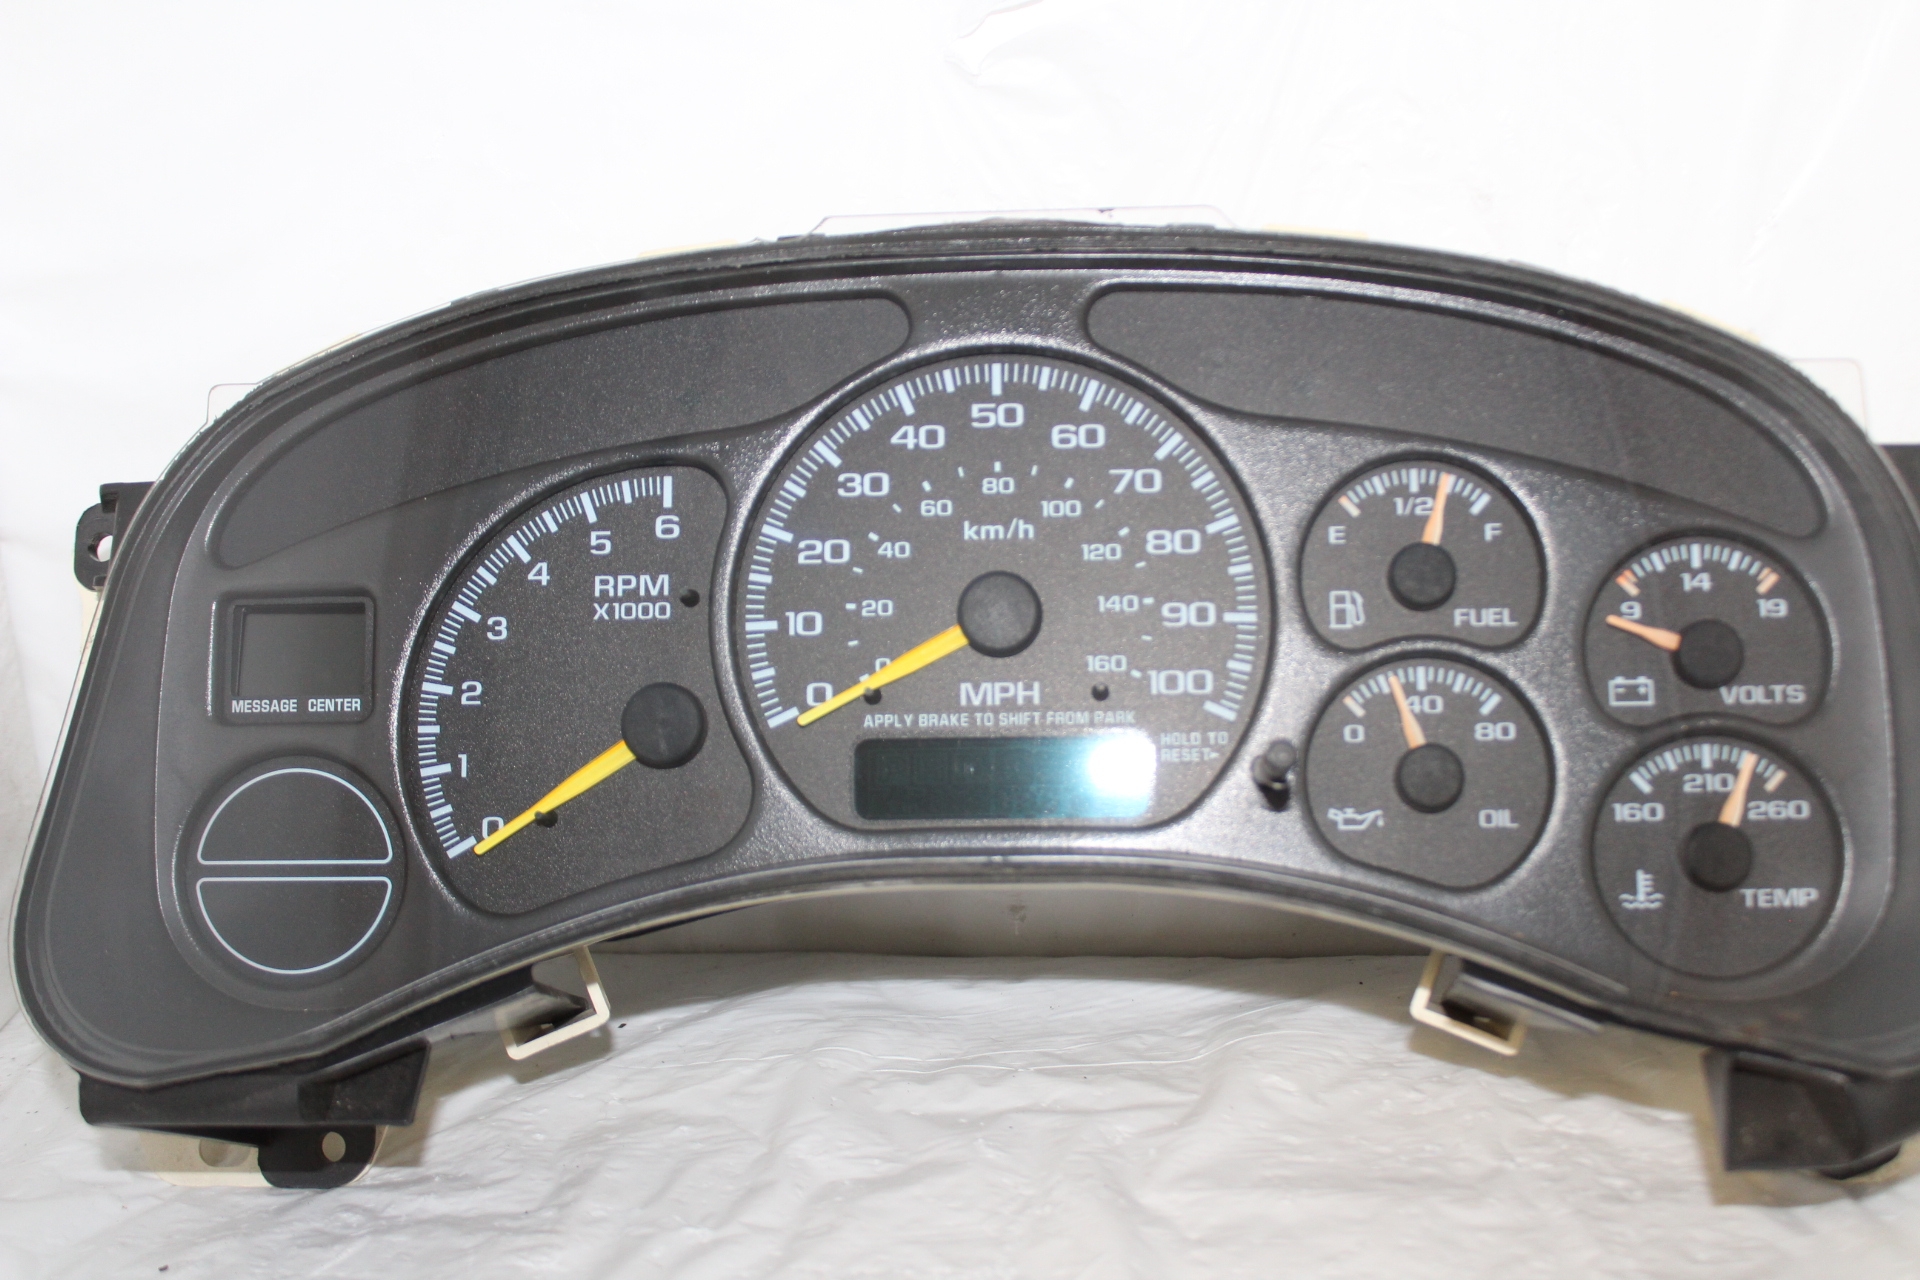 Used 2000 Chevy Silverado 1500 Instrument Cluster, Automatic